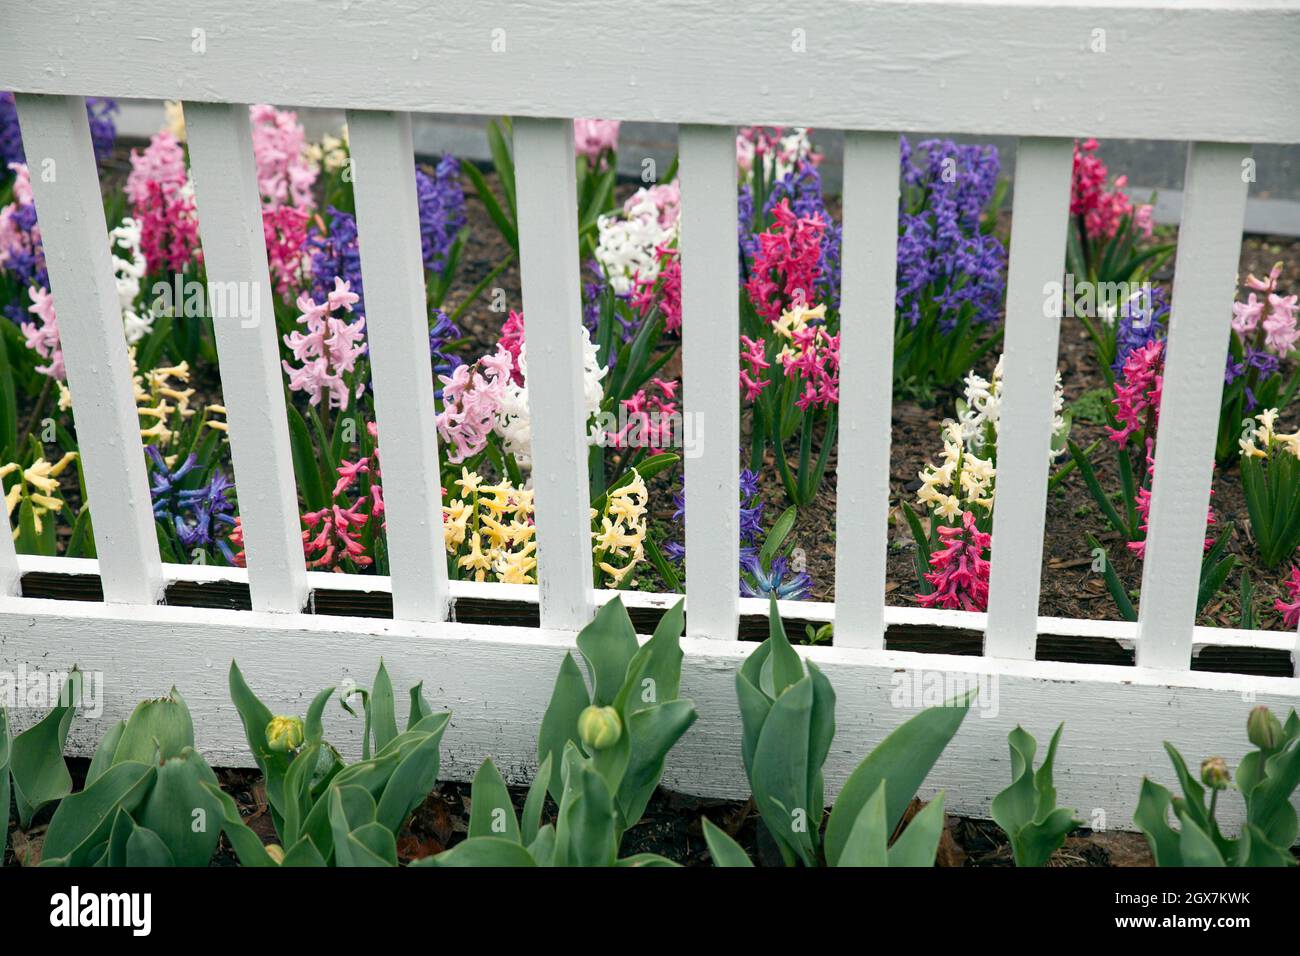 Bed of hyacinths in front yard of Massachusetts home with white picket fence. Stock Photo